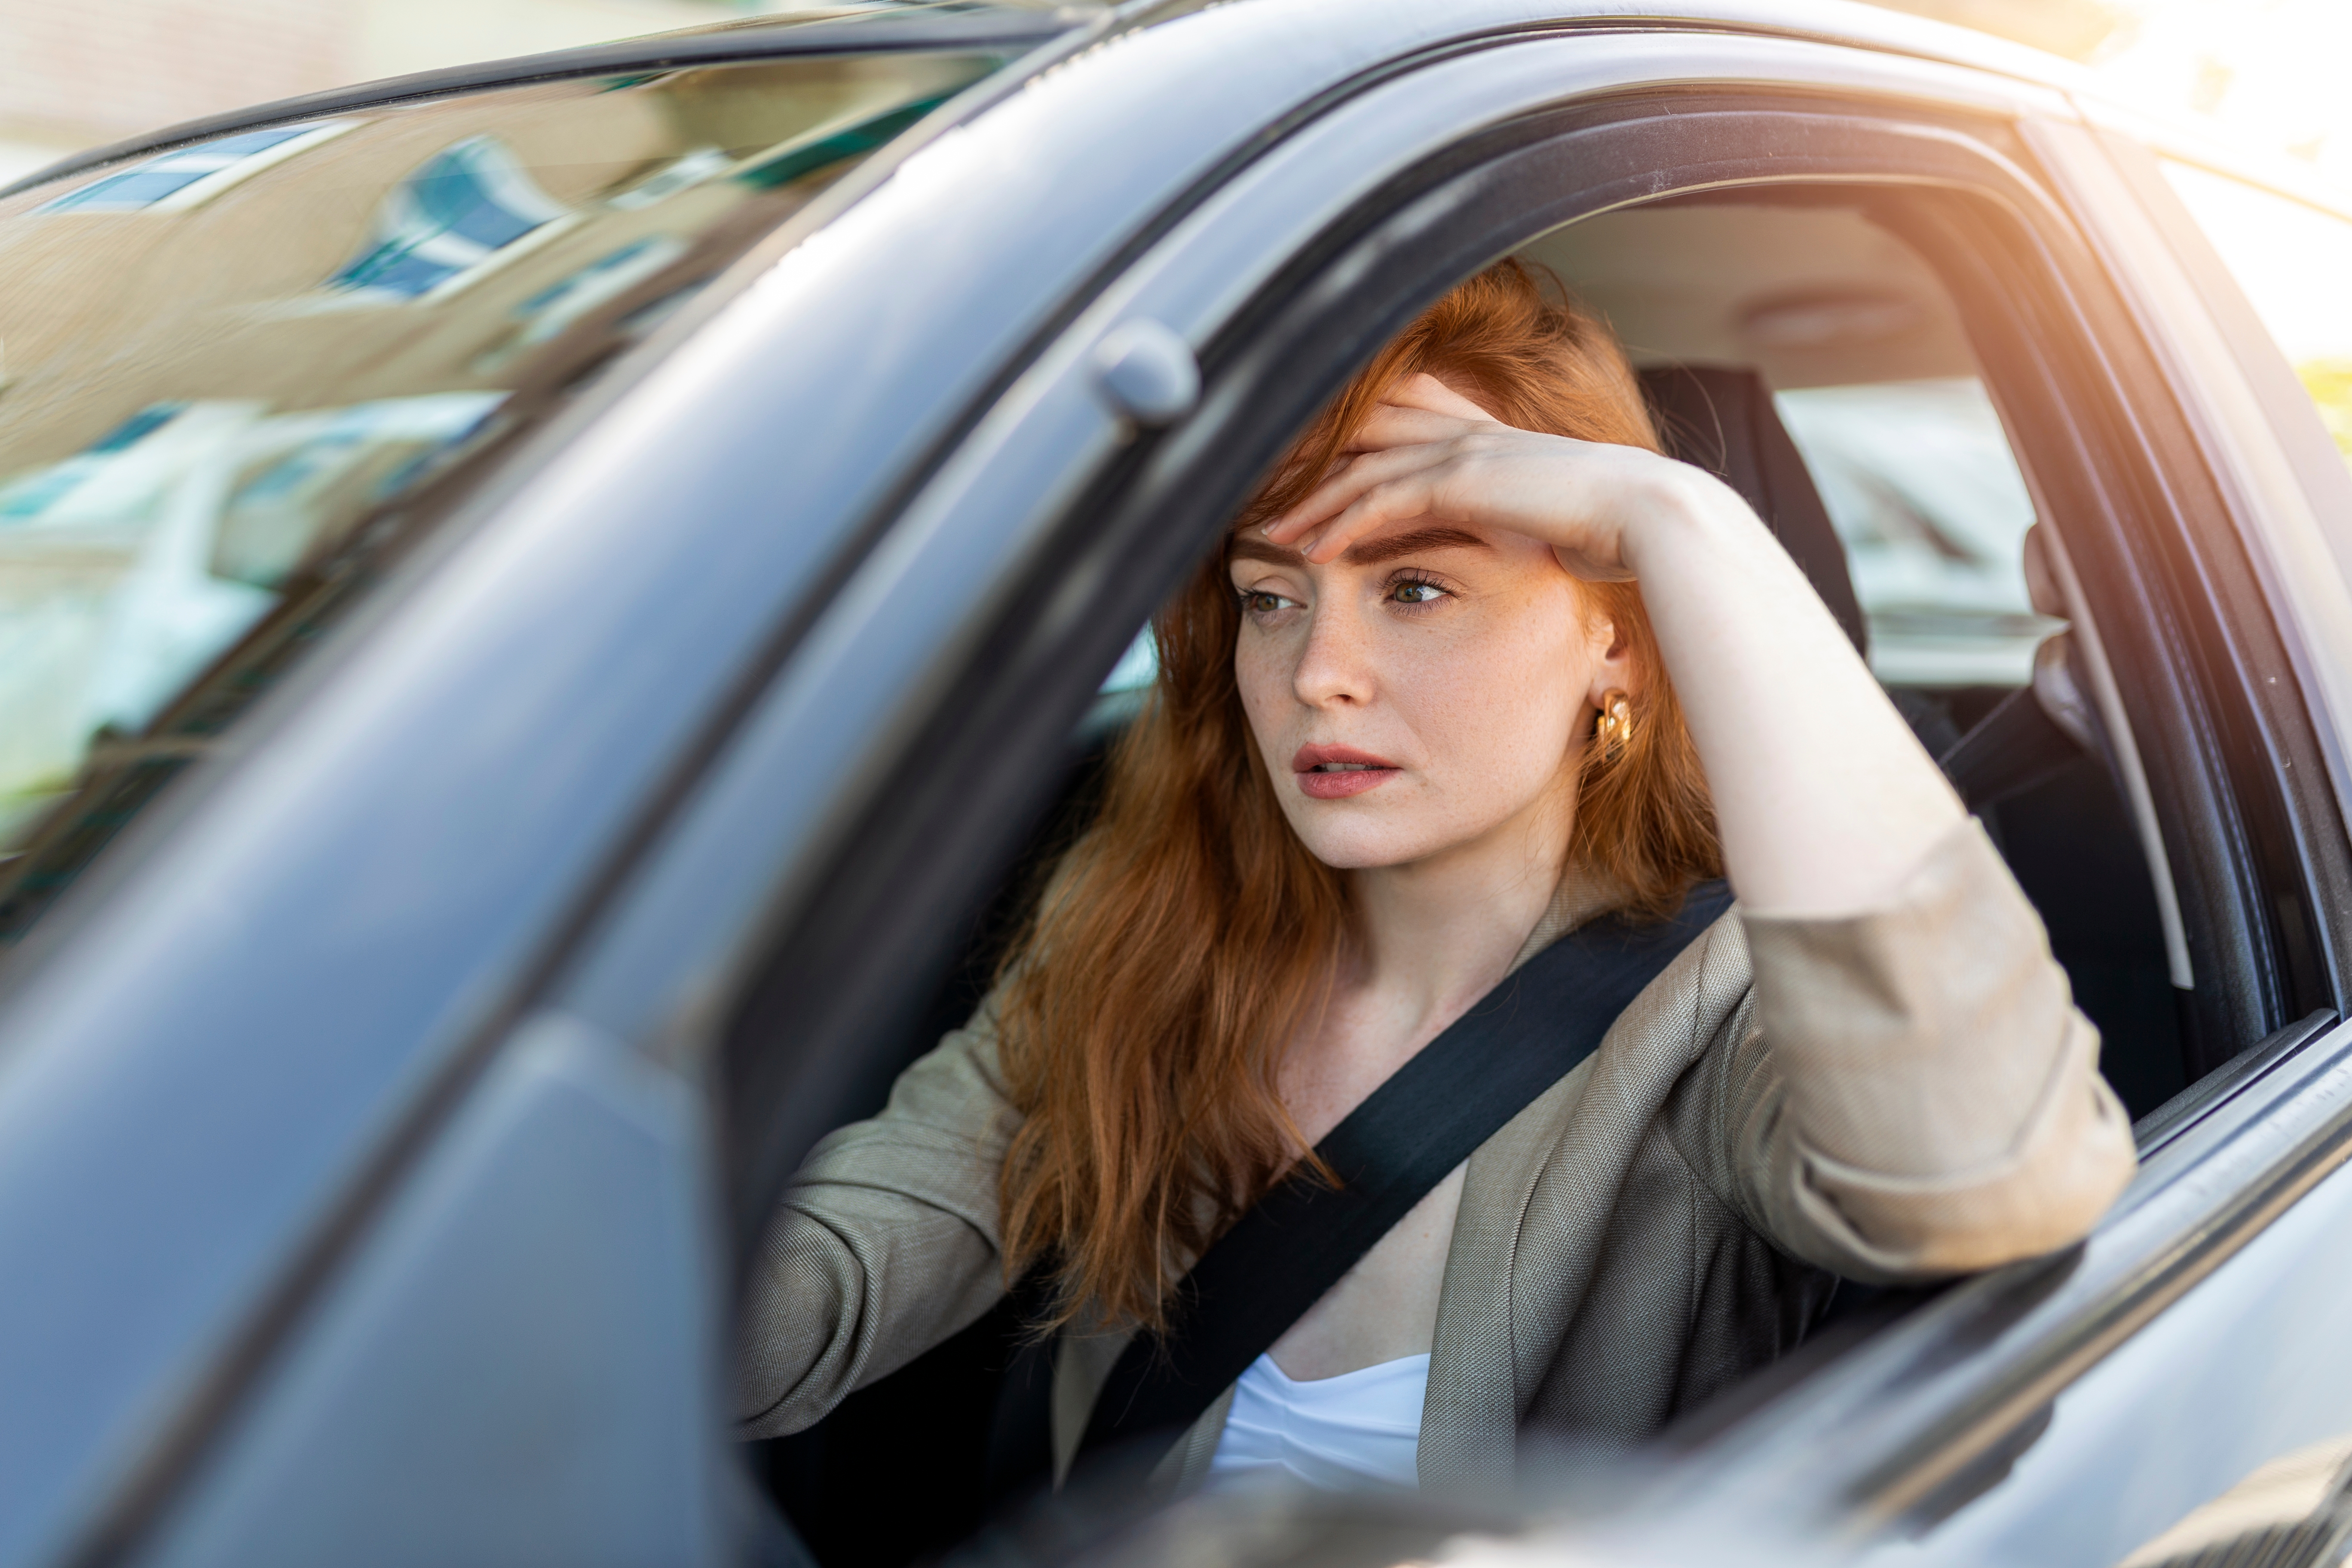 A woman in the car thinking | Source: Shutterstock